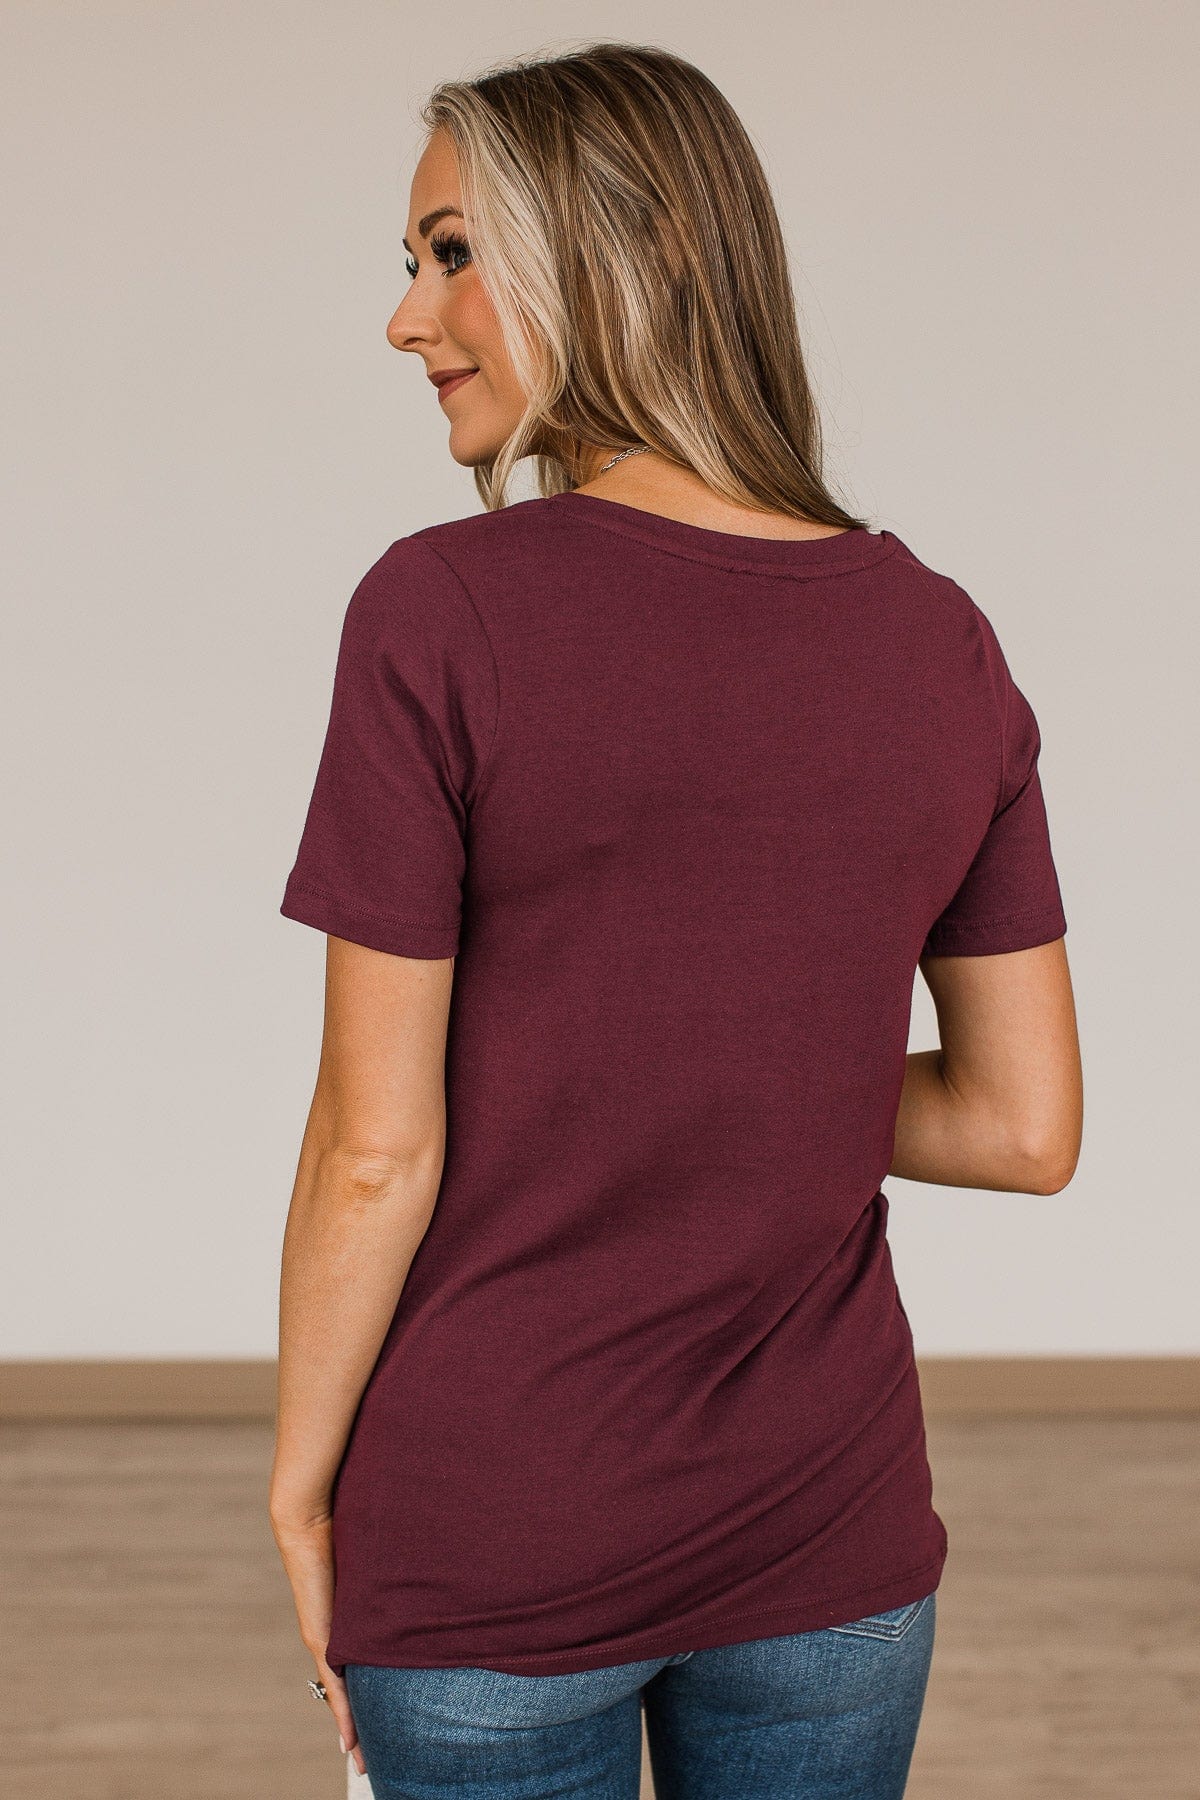 From The Moment We Met V-Neck Tee- Burgundy